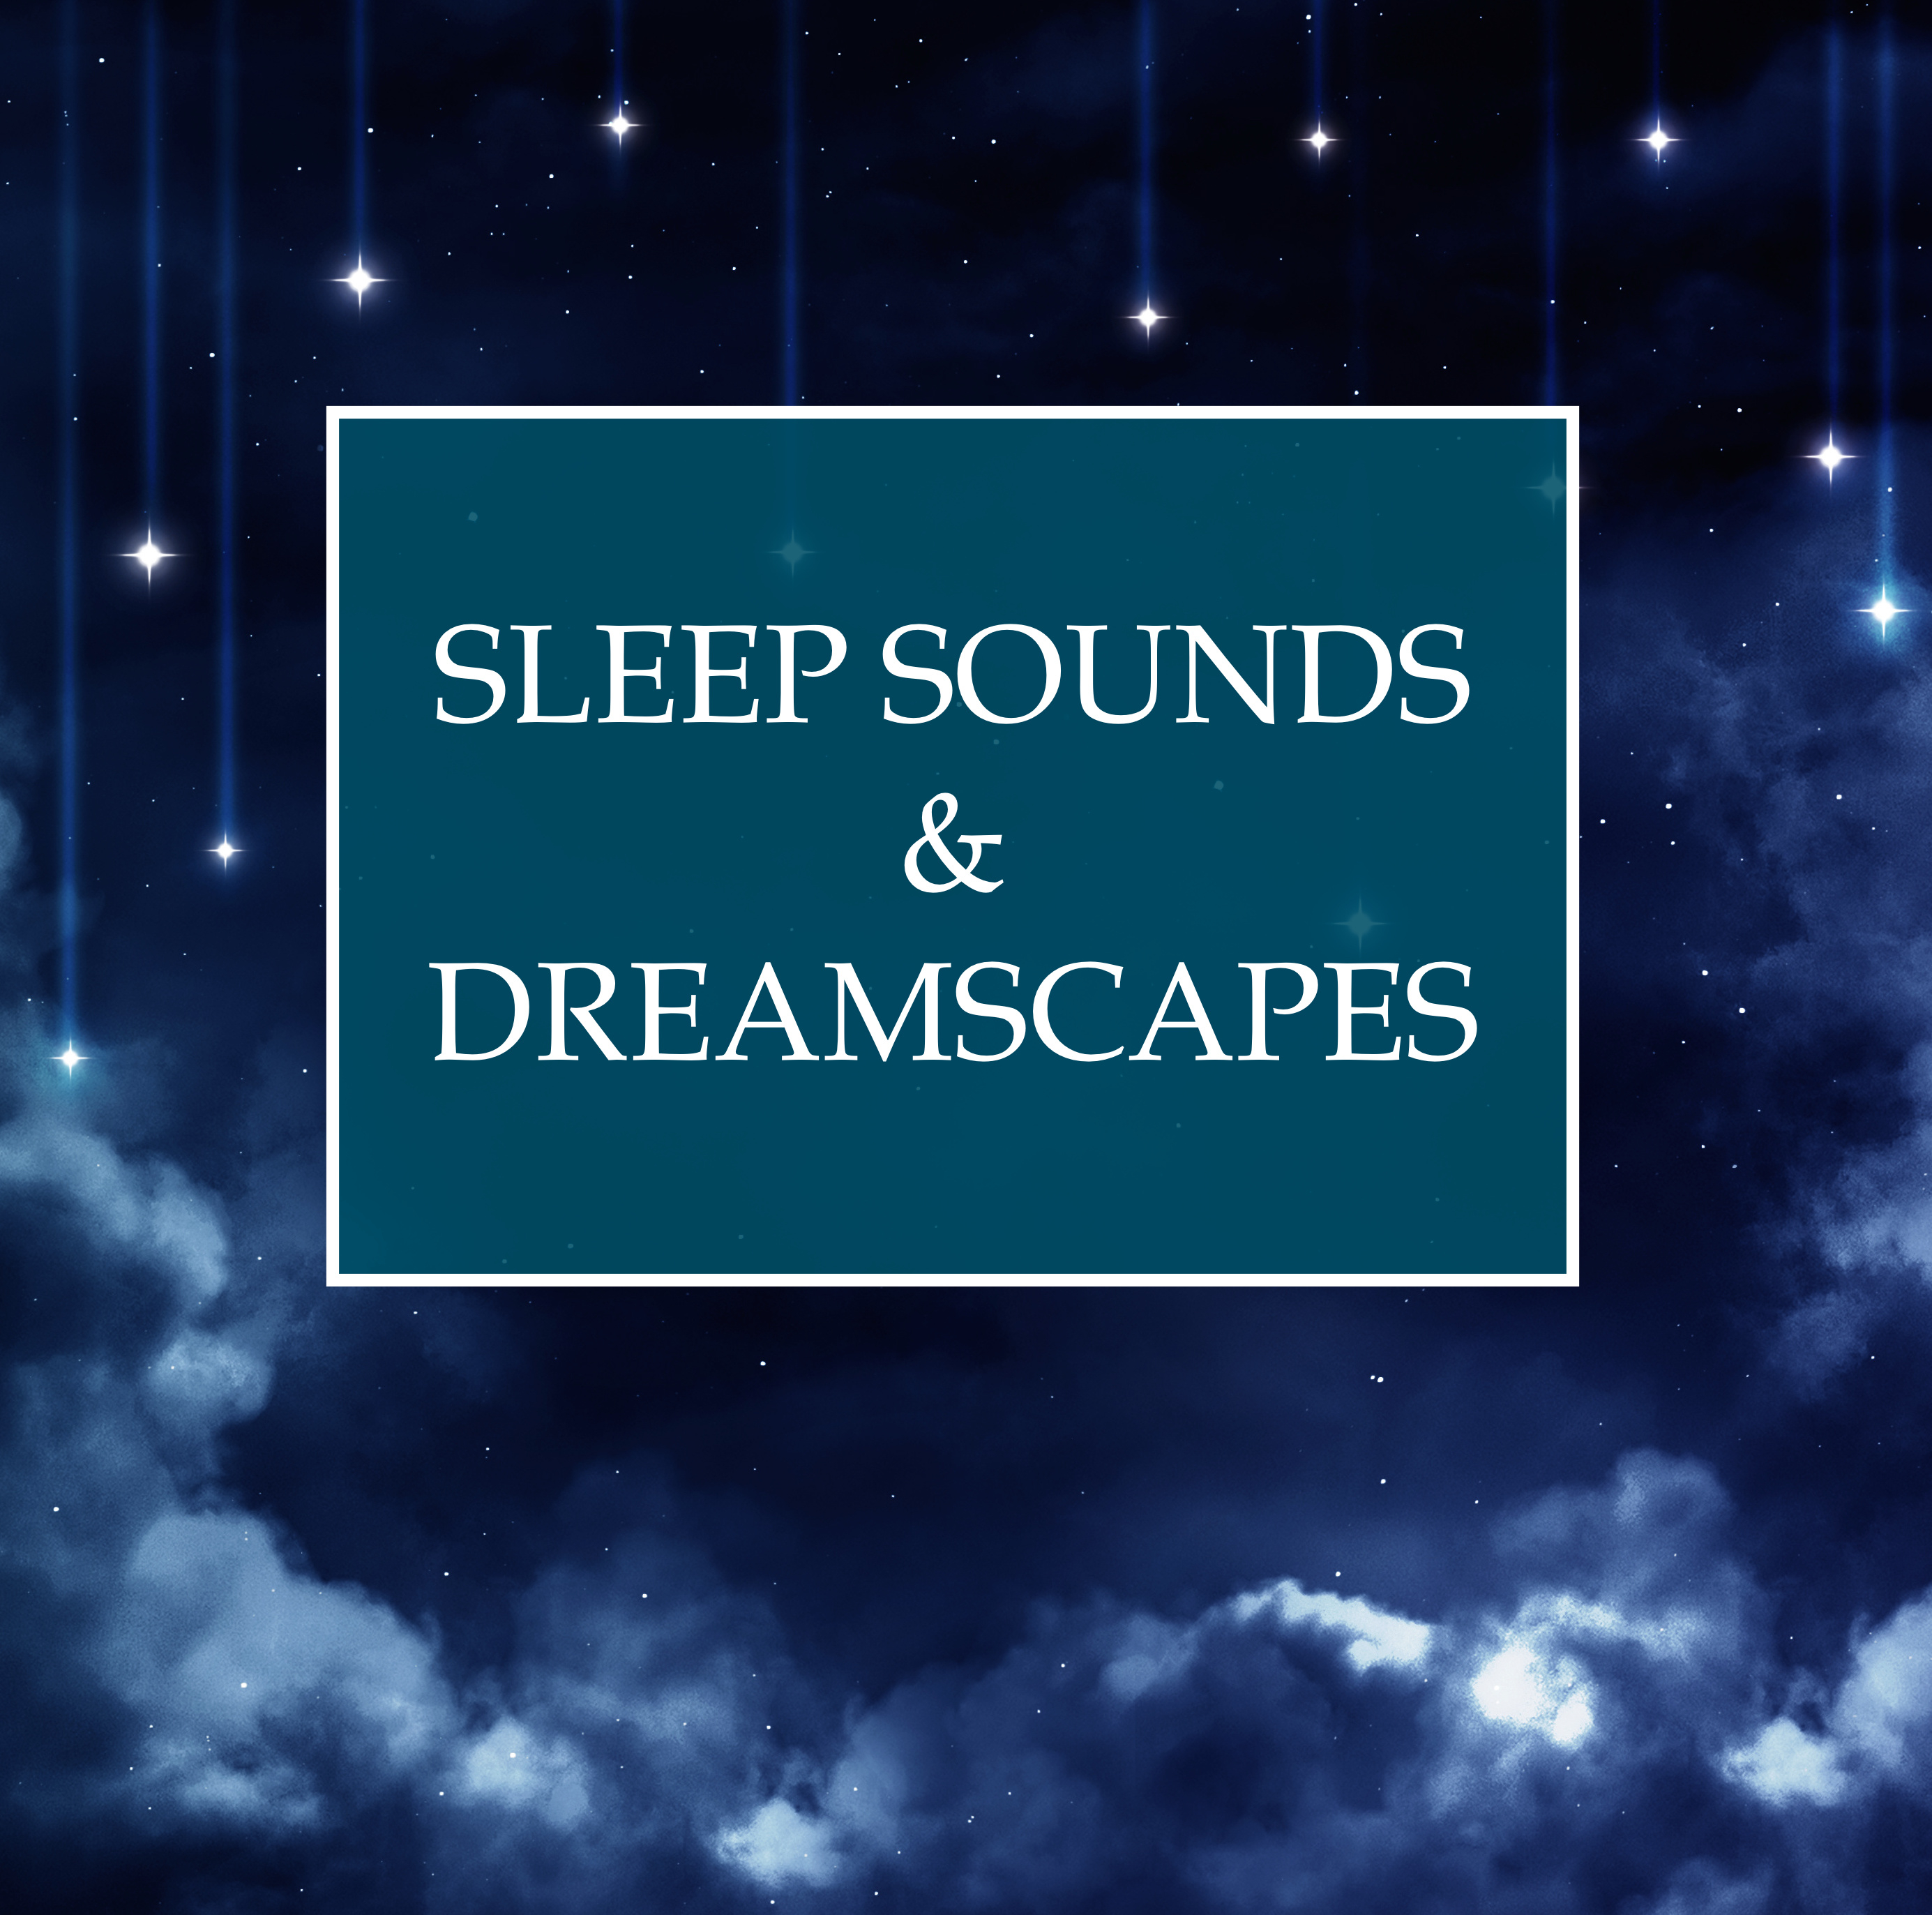 Sleep Sounds & Dreamscapes - Relaxing and Tranquil Music to For Deep Sleep, Lucid Dreaming, and Transcendental Meditation Sessions